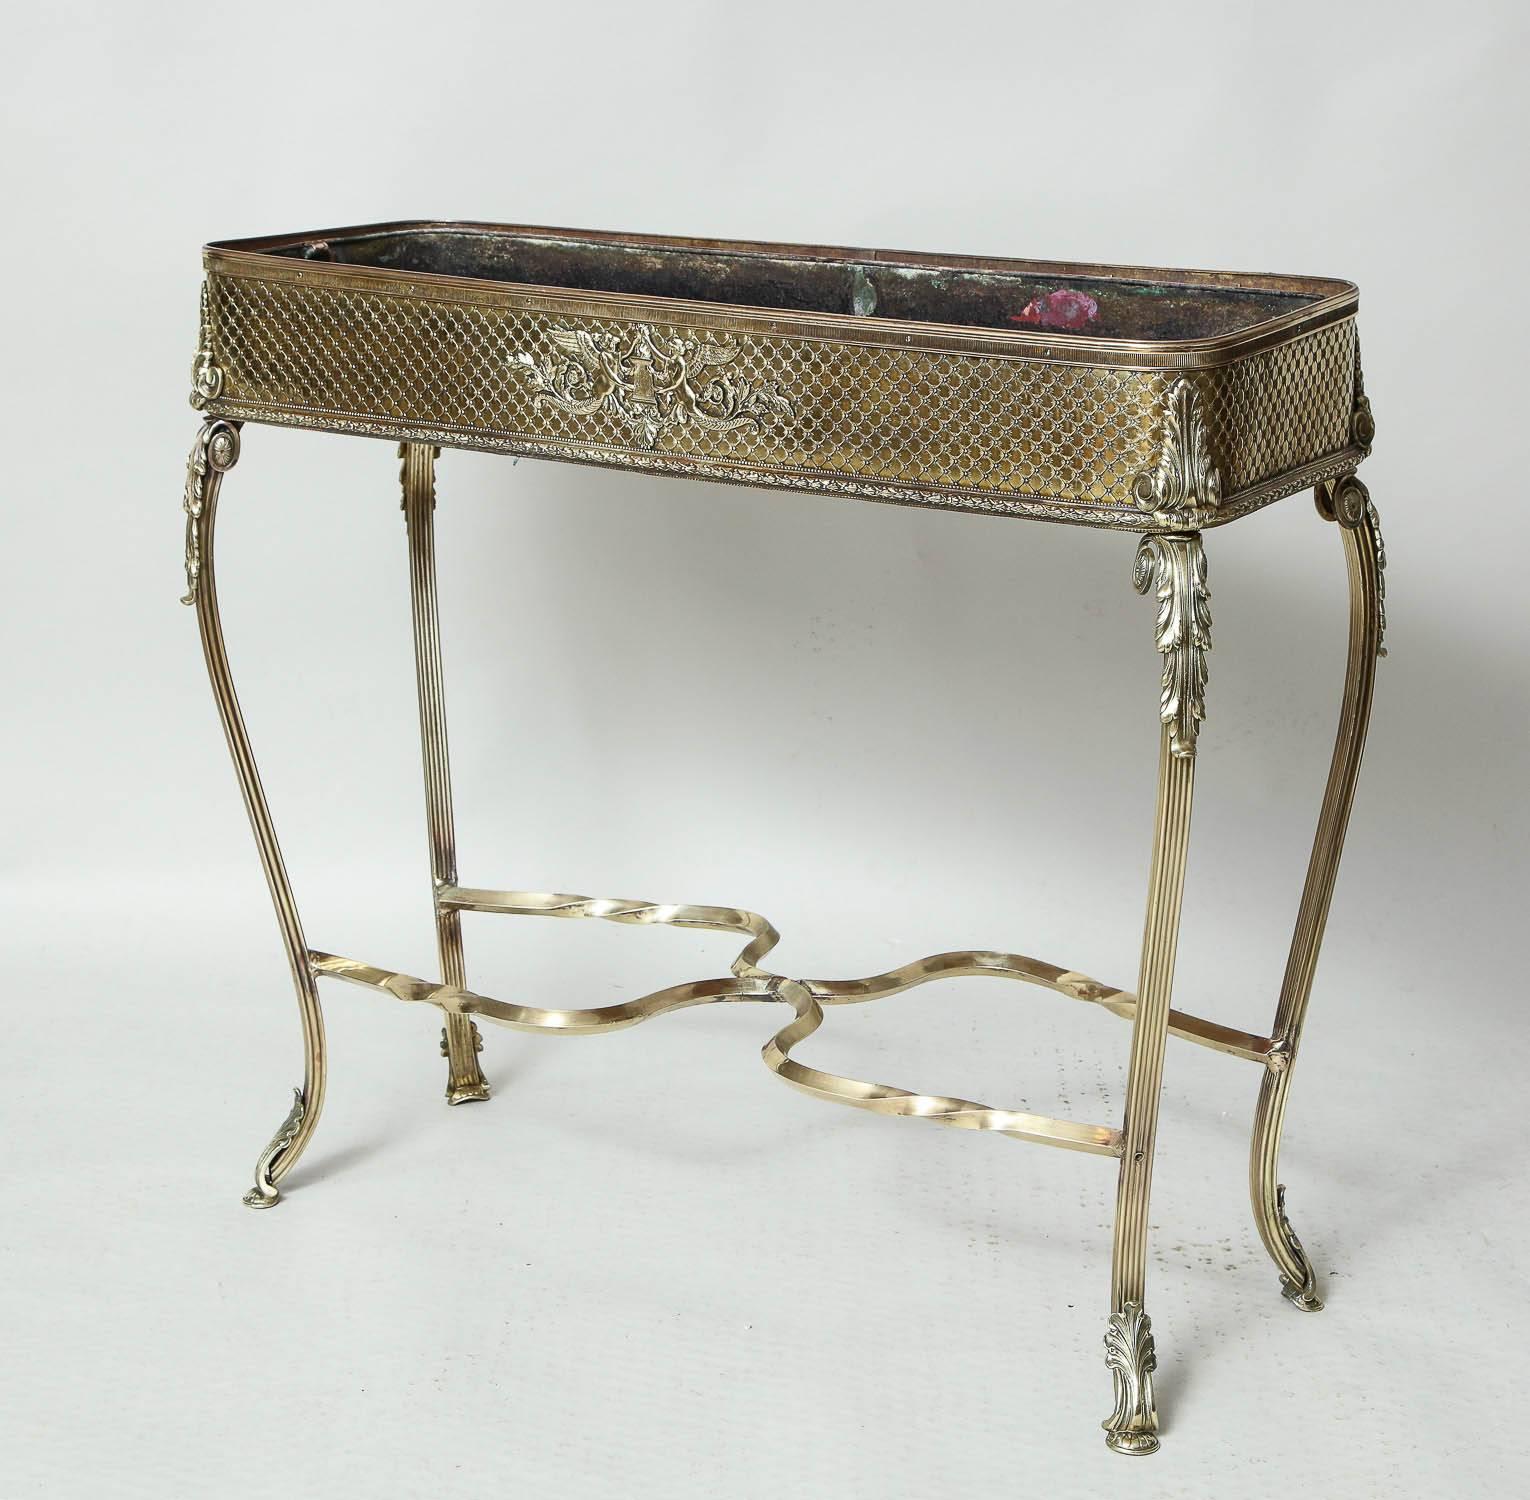 A French early 20th century brass conservatoire planter with reed-stitched decorated sides on shaped cabriole legs with acanthus decoration and elaborate H-stretcher, having original brass pull-out liner.